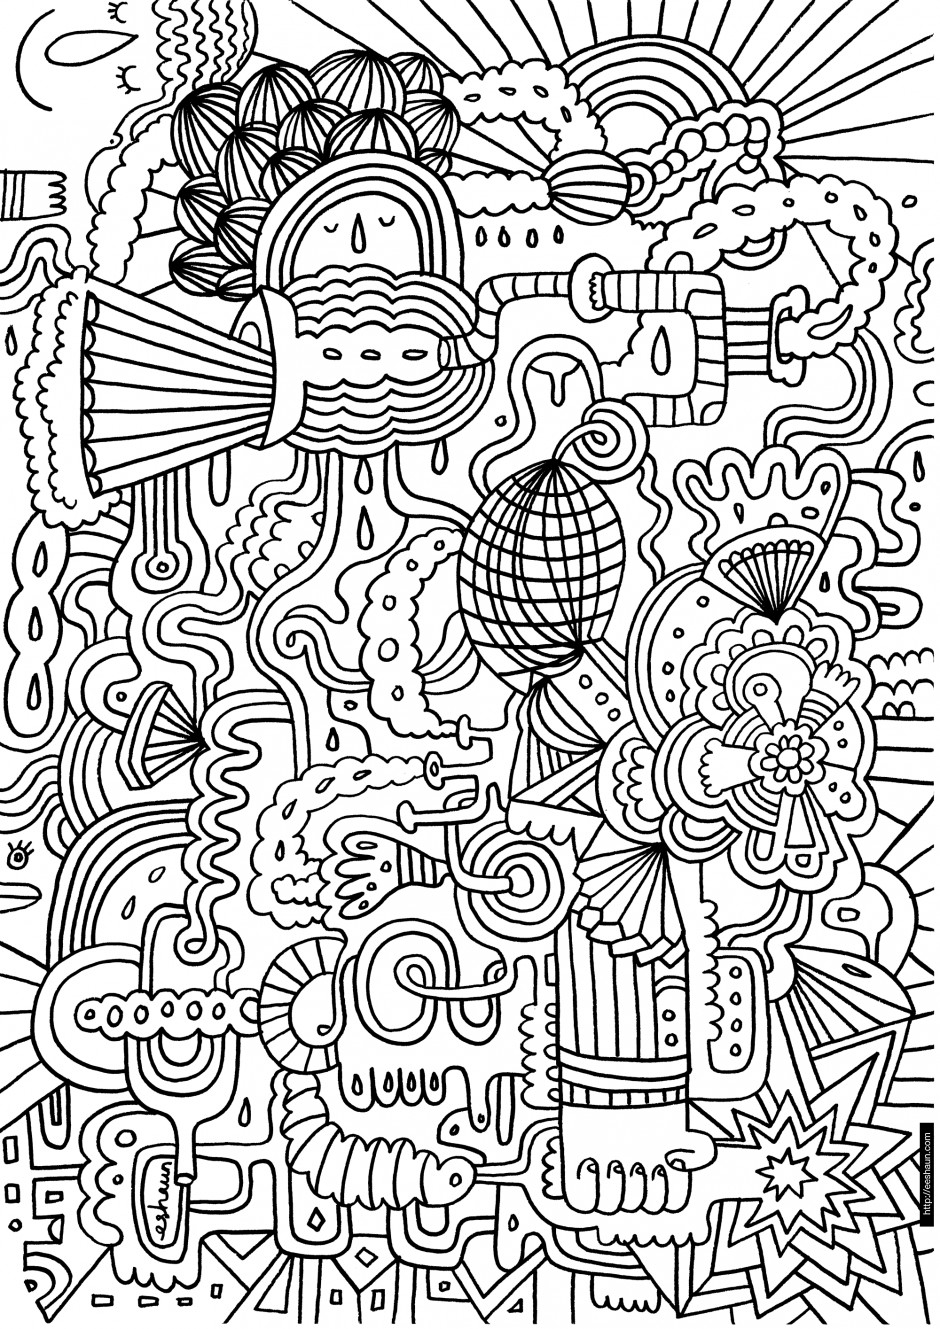 Coloring Pages Of Teen Cute Boys
 Coloring Pages for Teen Girls Dr Odd